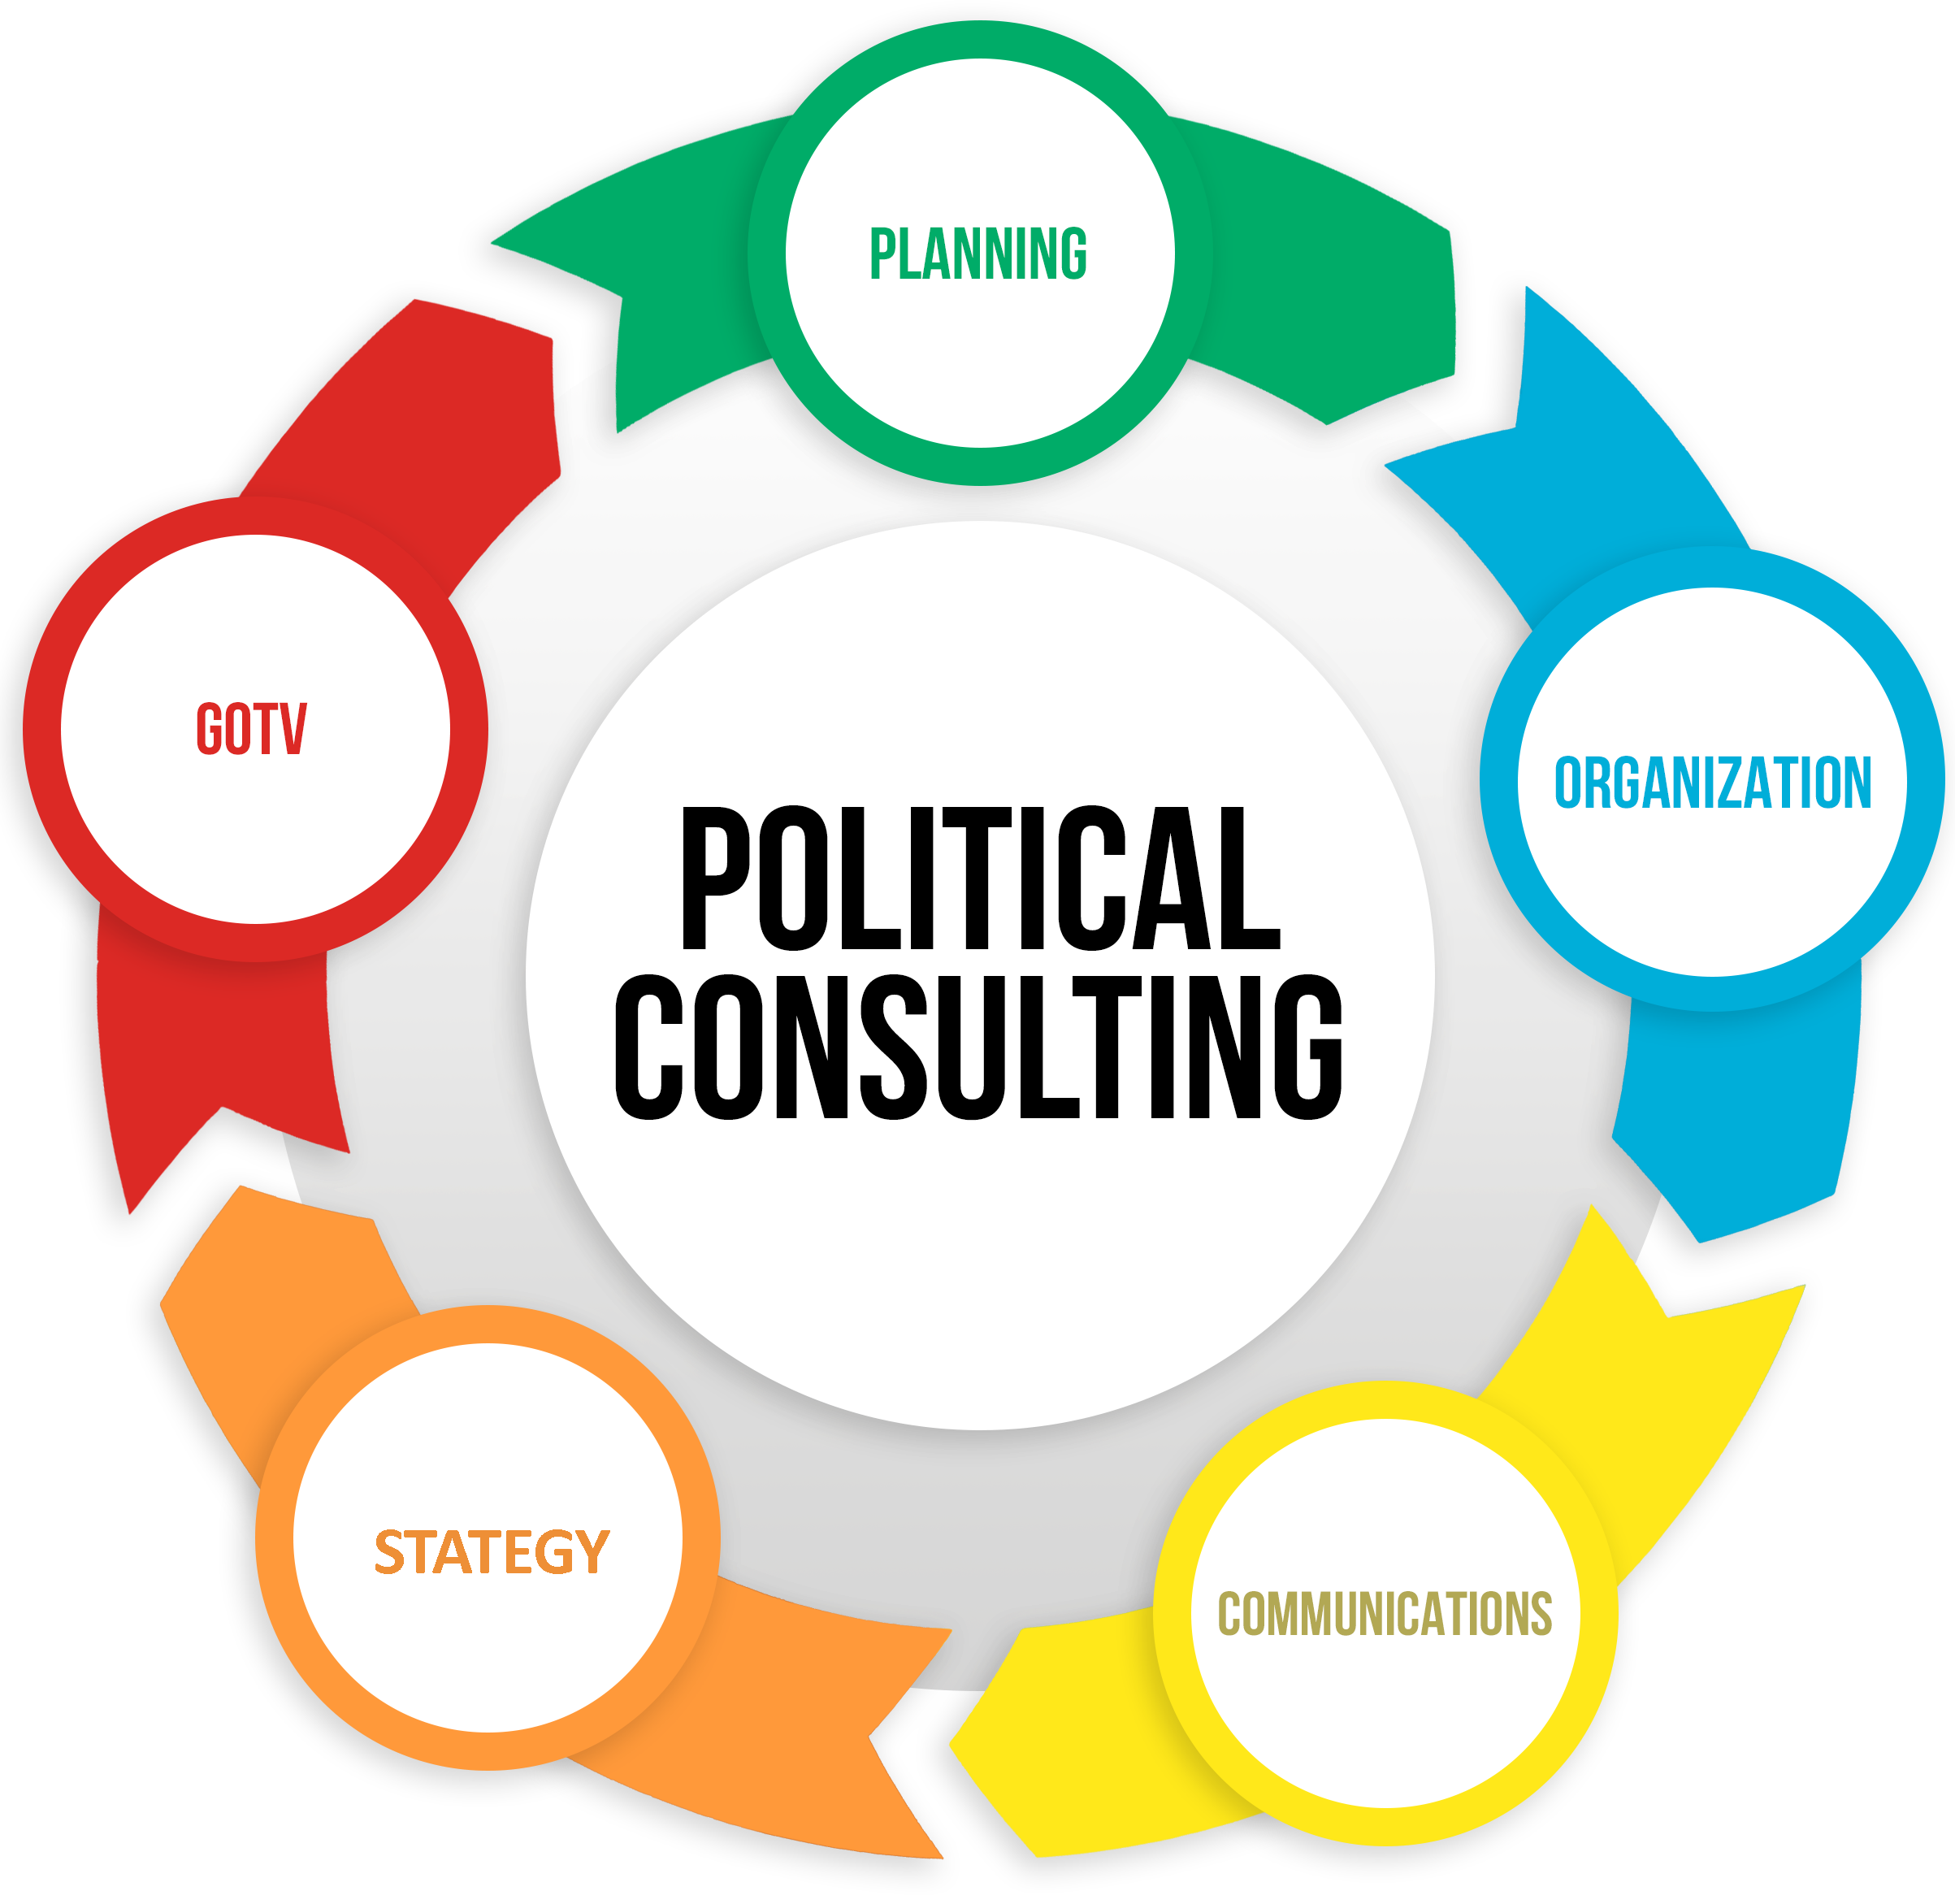 POLITICAL CONSULTING